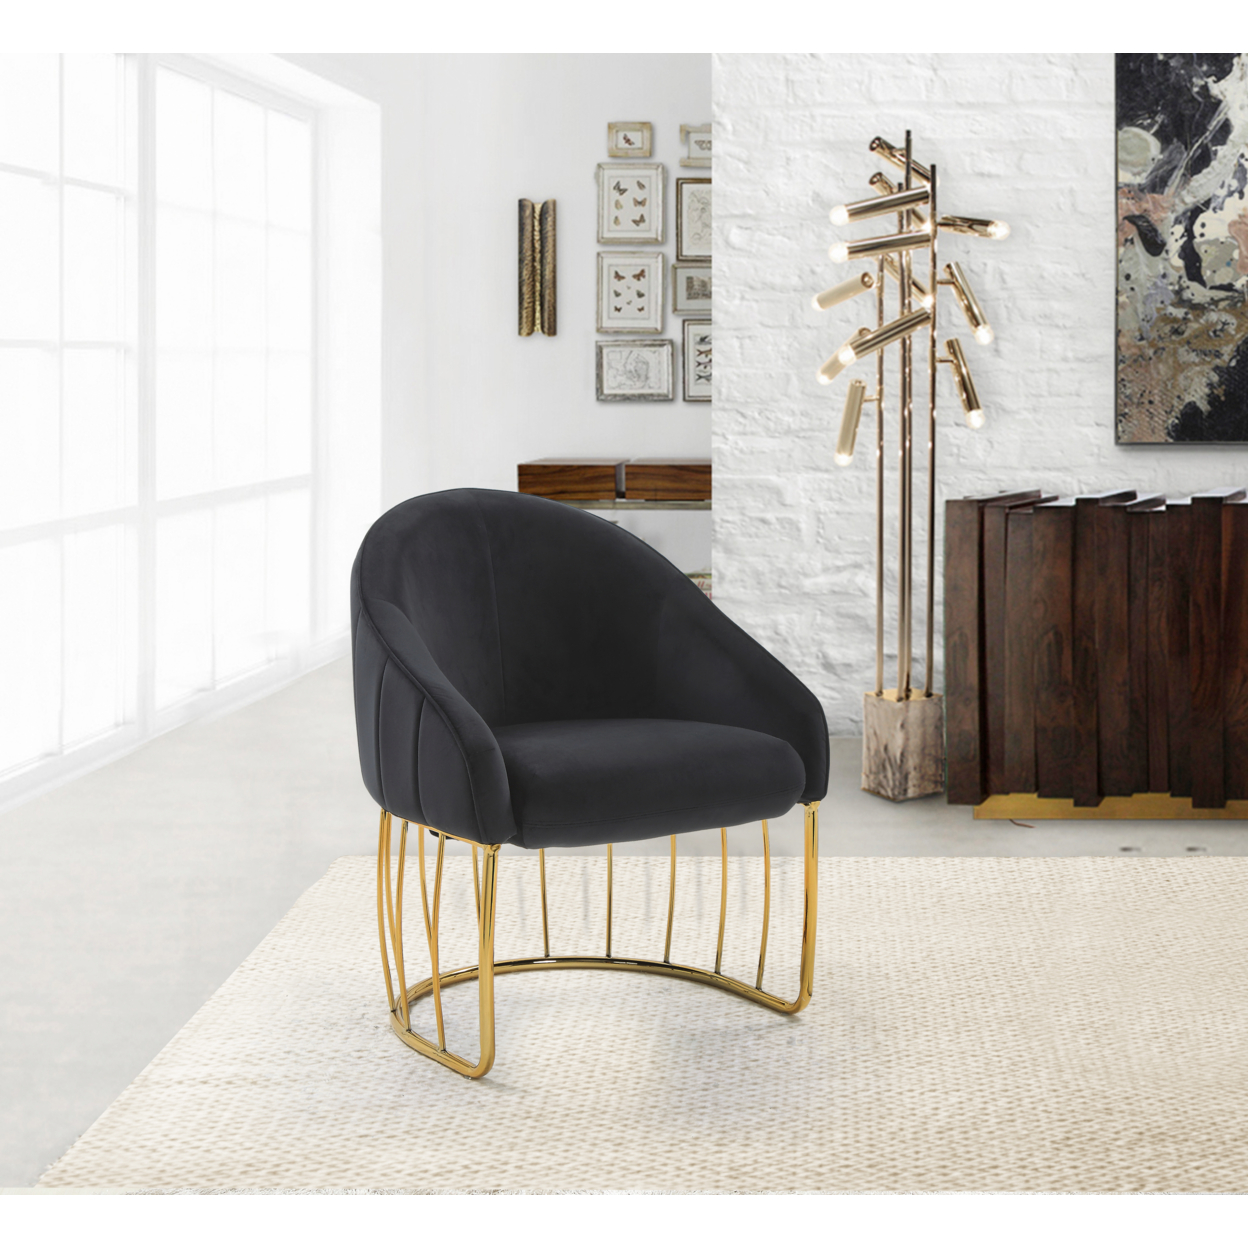 Hammerstein Accent Club Chair Velvet Upholstered Half-Moon Gold Plated Rods Solid Metal Base - Black